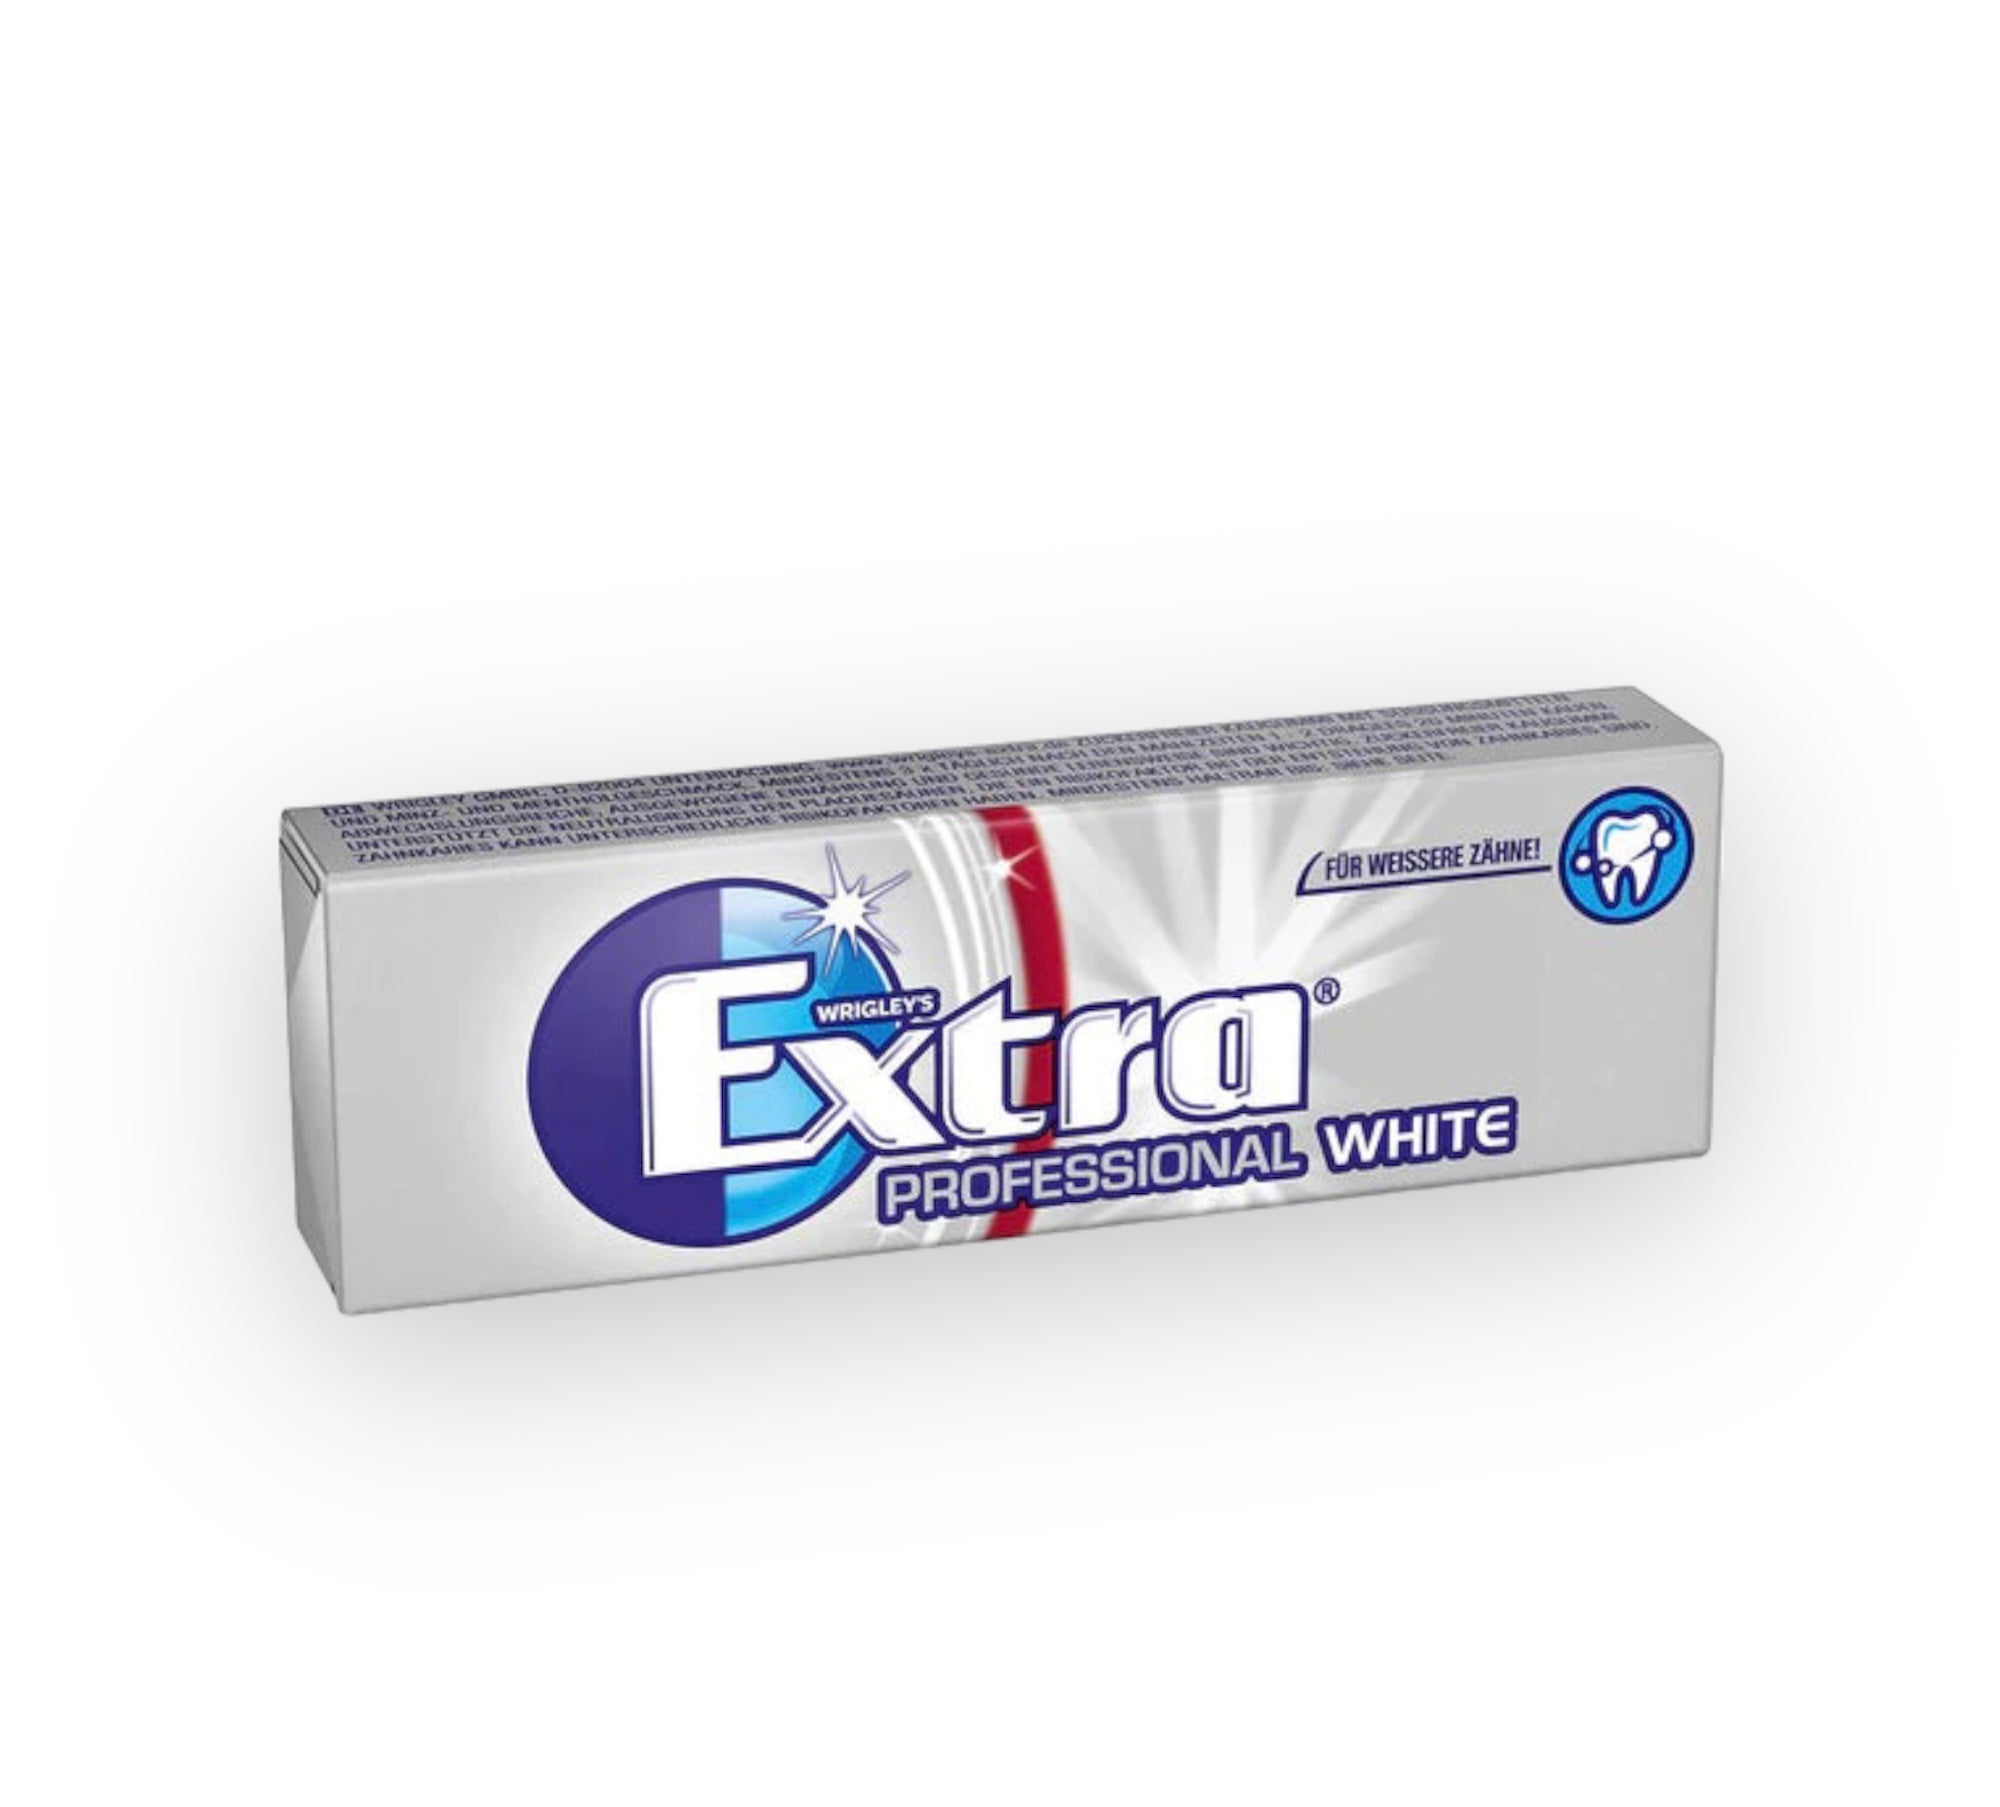 EXTRA Professional chewing gum white, white teeth, 10 pieces